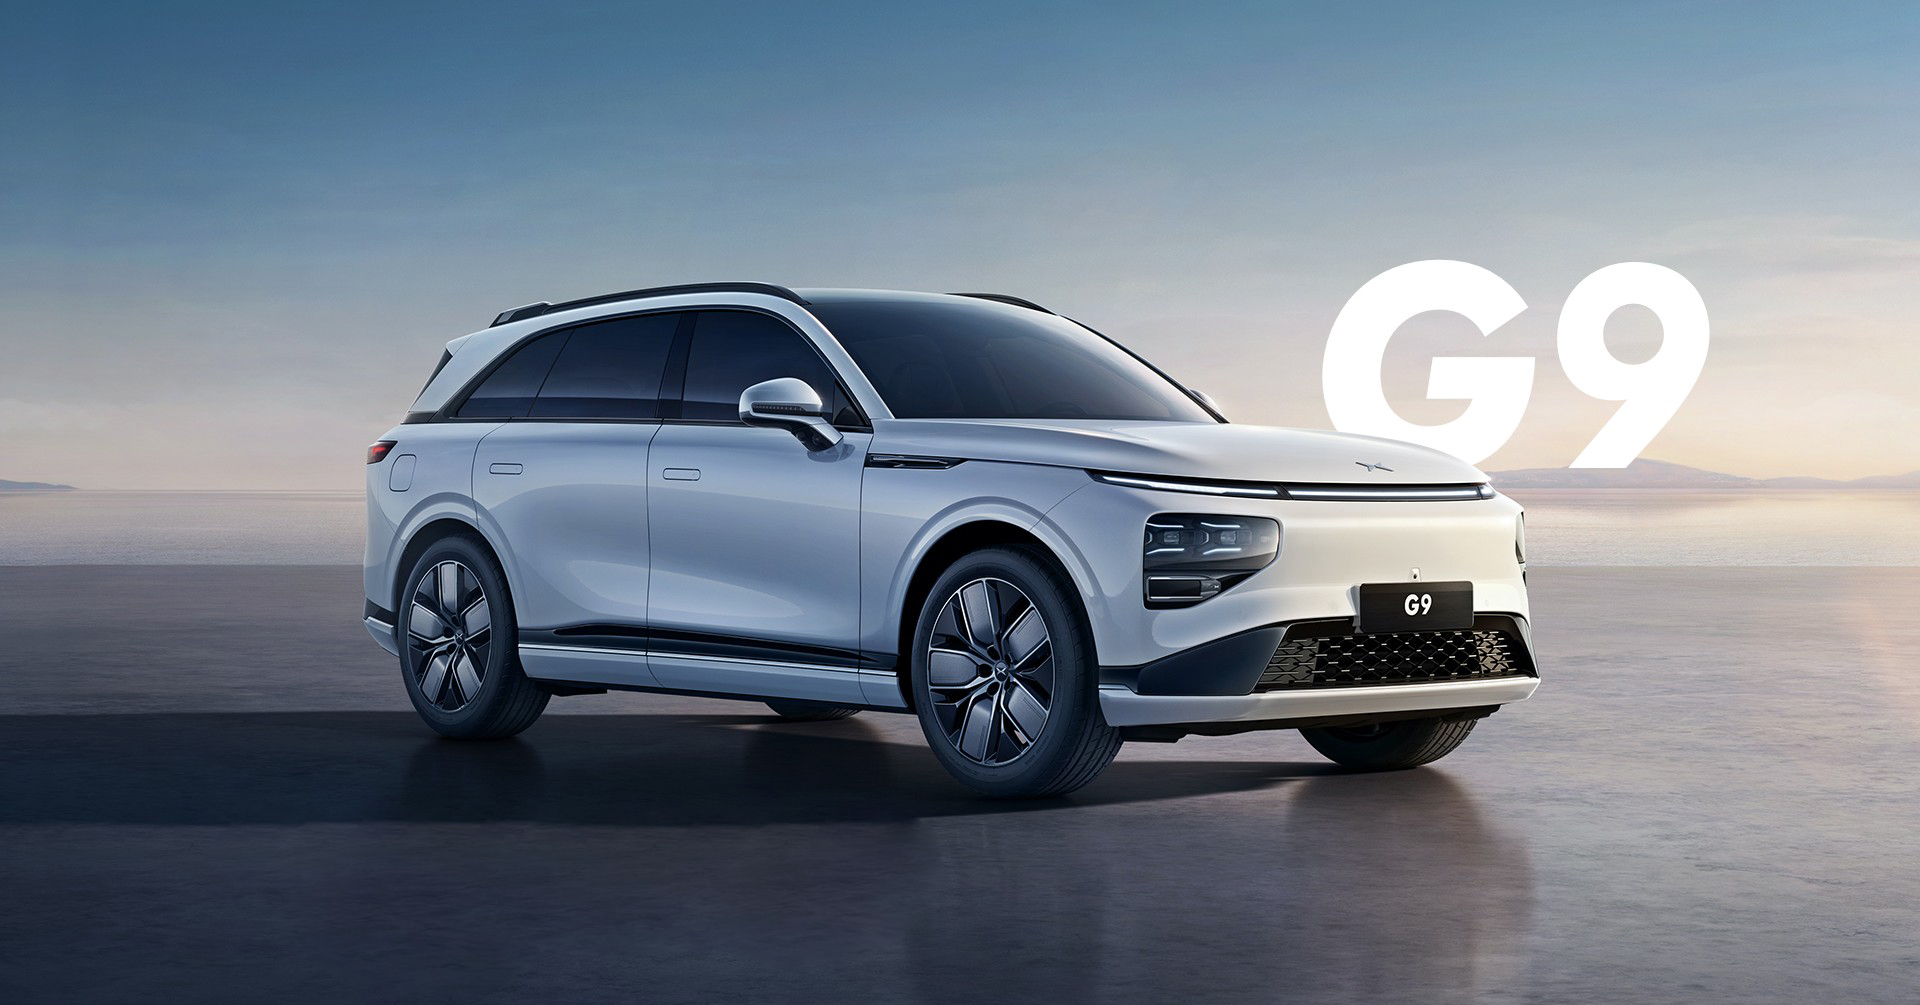 Guangzhou Auto Show – The Introduction of XPeng G9 Flagship SUV in 3 Minutes